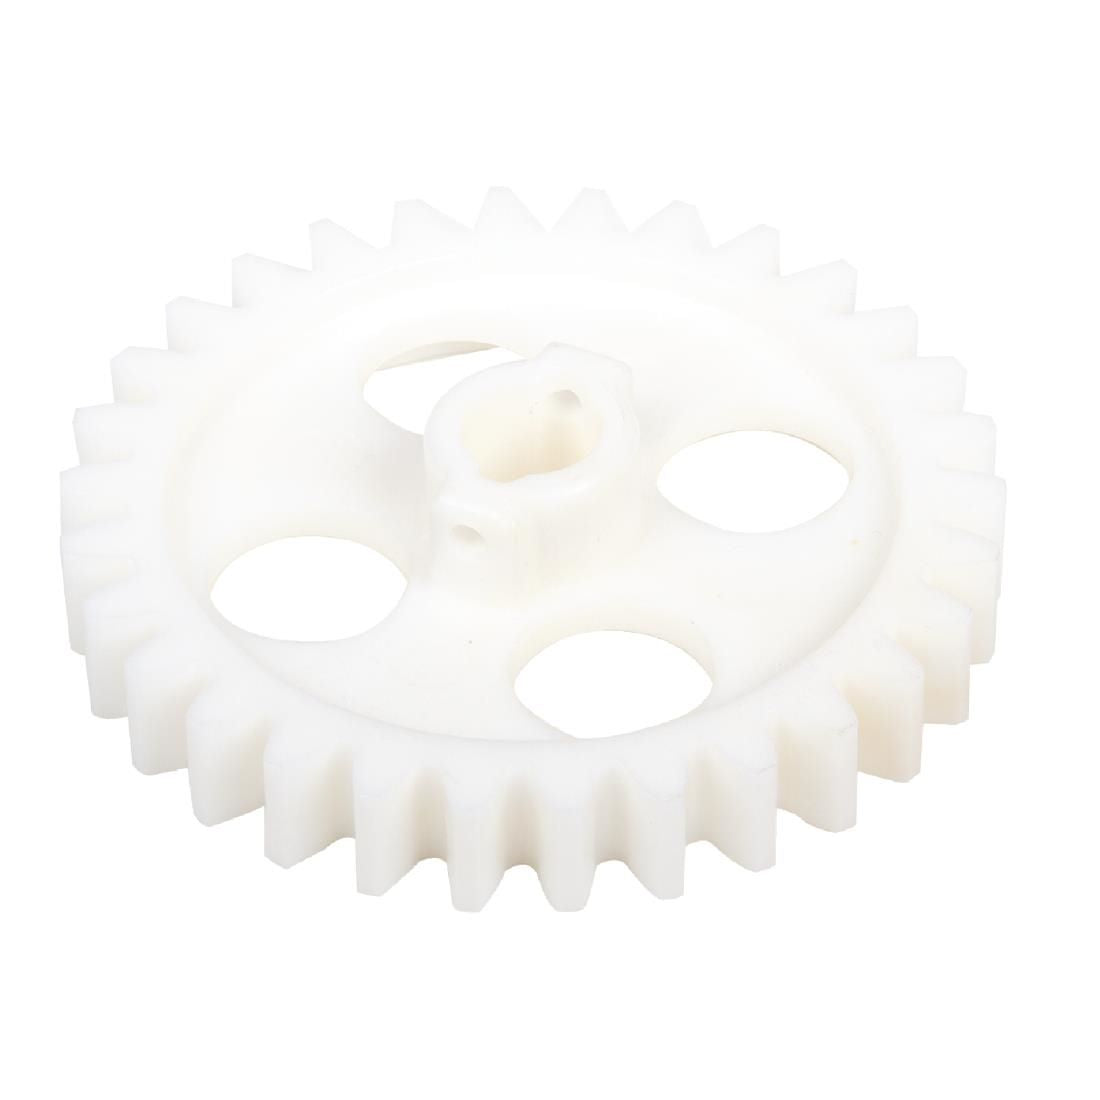 AD497 Perforated drive gear + pin